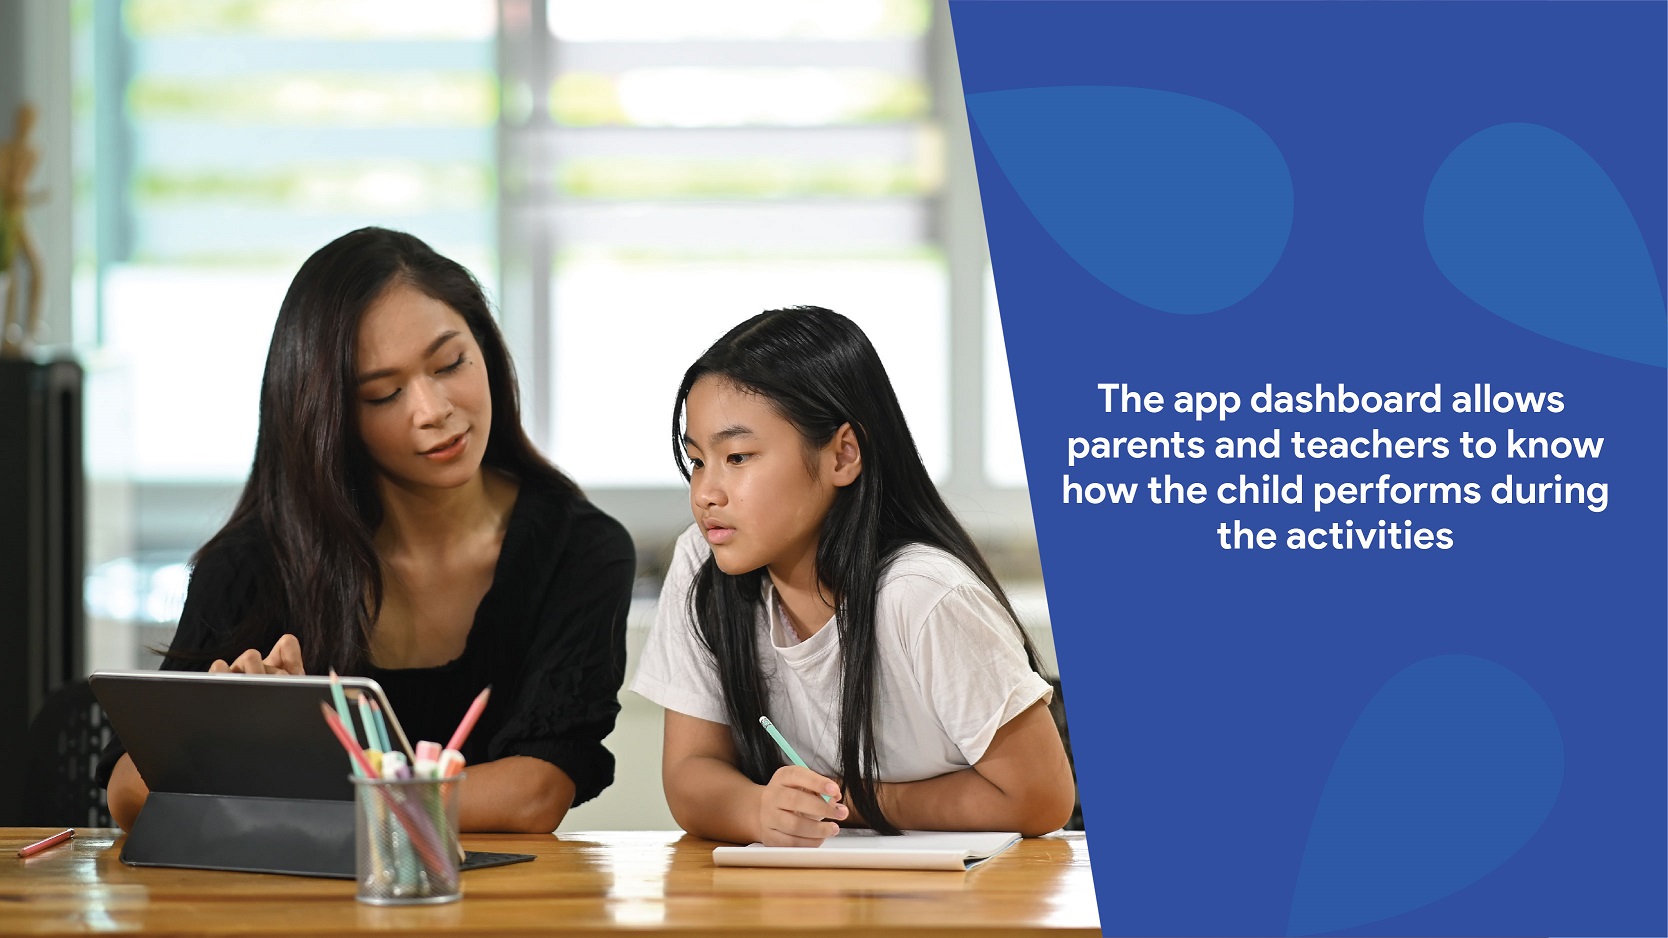 The app dashboard allows parents and teachers to know how the child performs during the activities